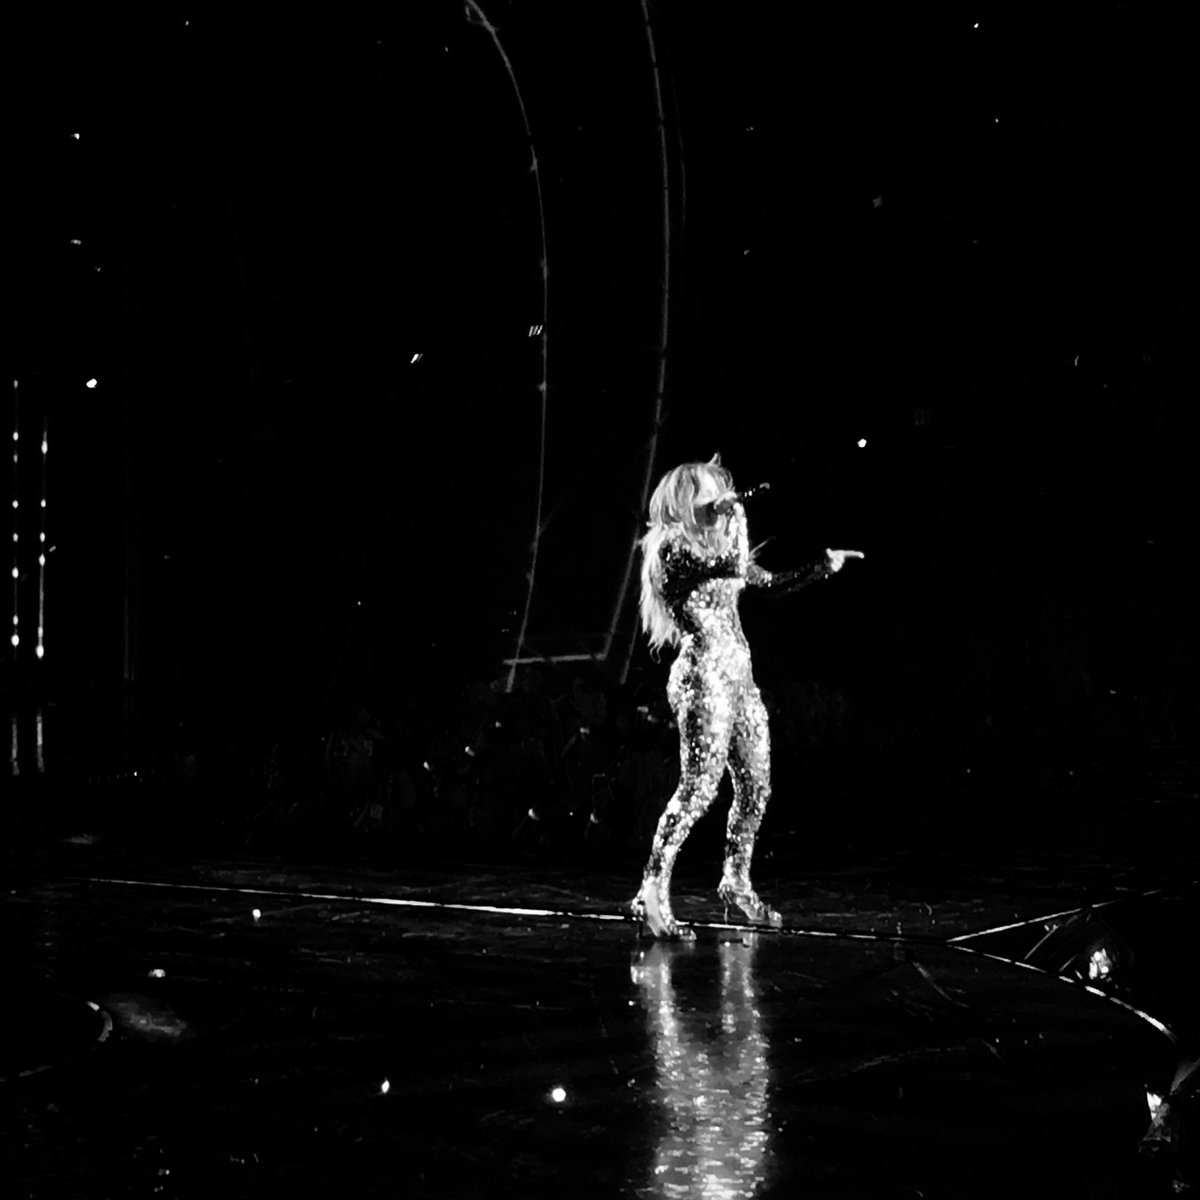 RT @MIKESNEDEGAR: 4th time and keeps getting better. Thank You @JLo - you give it #AlliHave EVERY TIME. #JLoVegas https://t.co/lwvqI2N87o